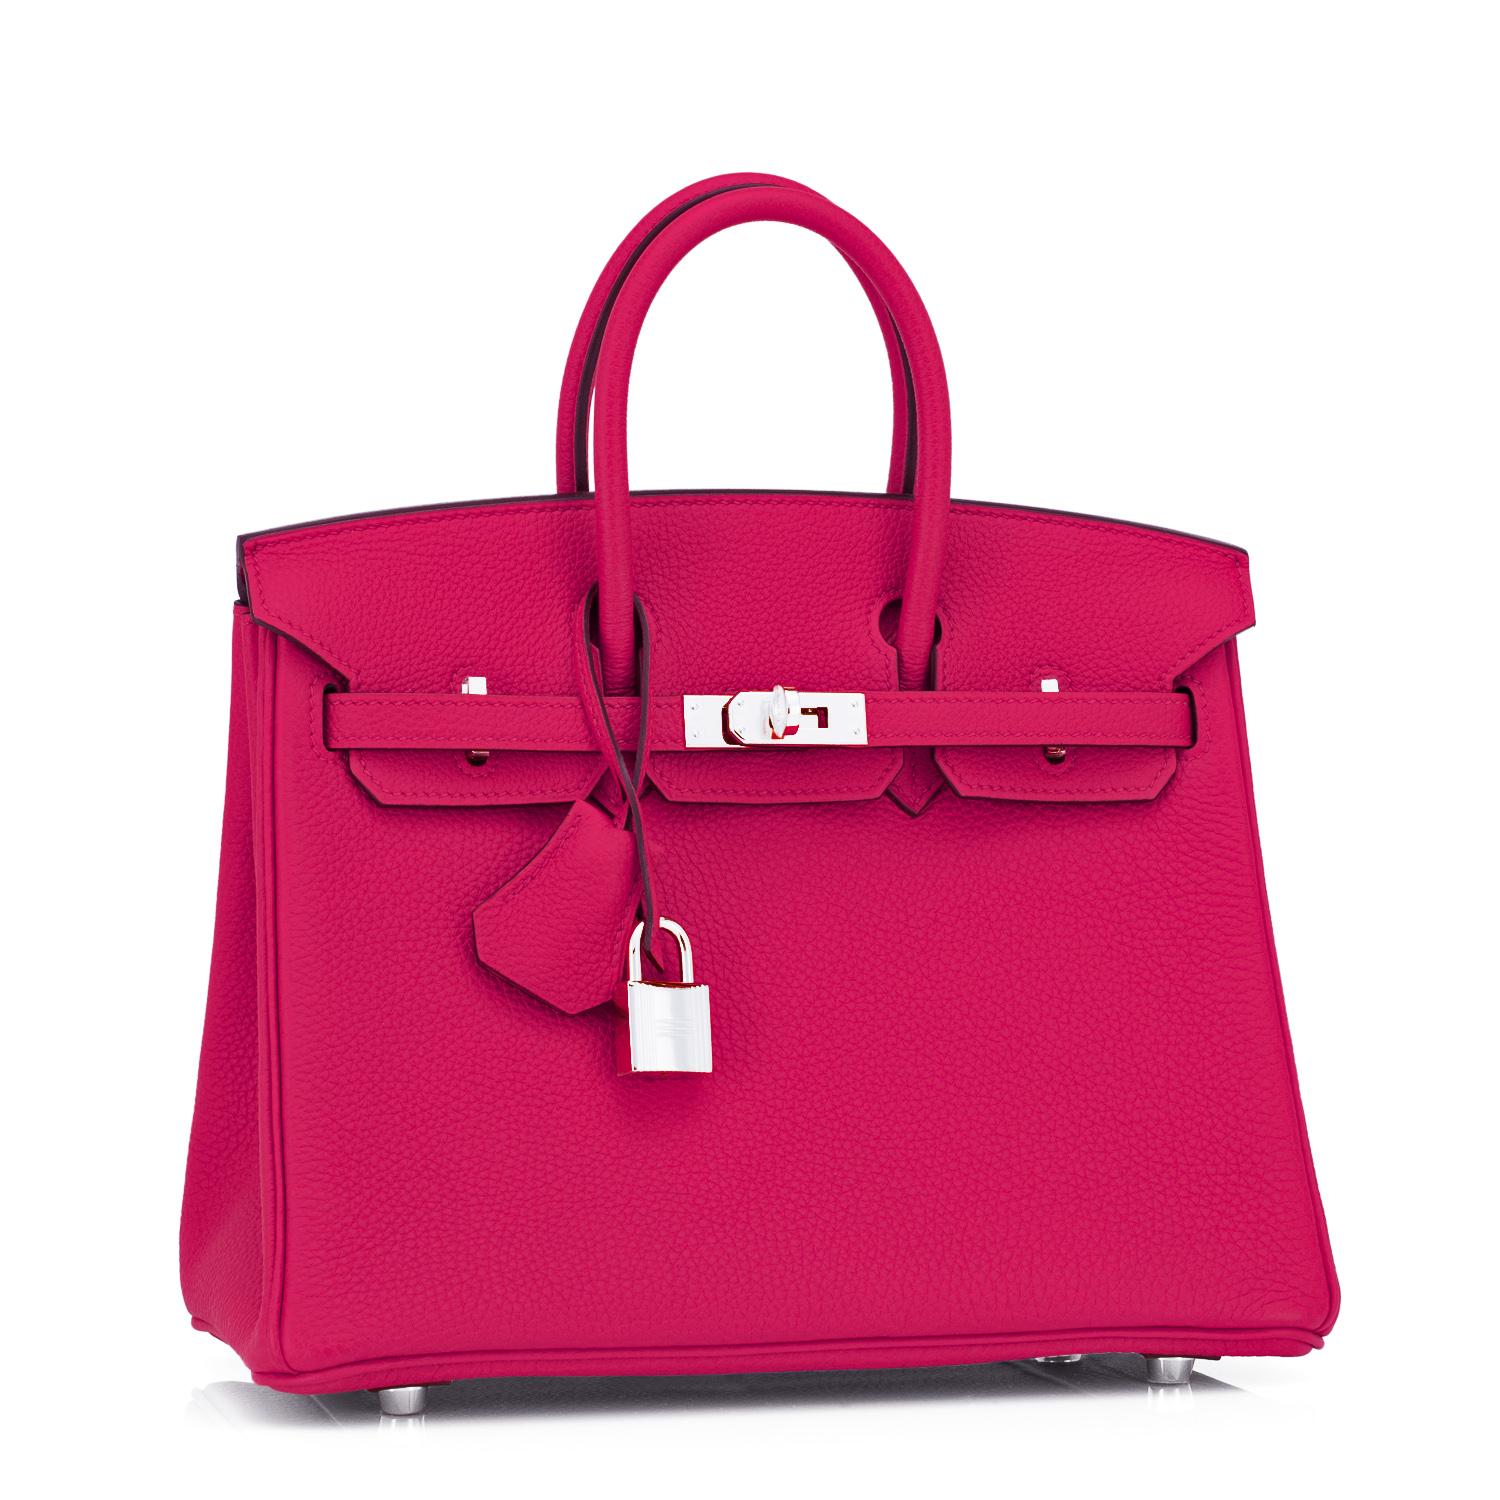 Hermes Birkin 25cm Rose Mexico Togo Pink Palladium Hardware Z Stamp, 2021
Just purchased from Hermes store; bag bears new interior 2021 Z Stamp.
Brand New in Box. Store fresh. Pristine Condition (with plastic on hardware)
Perfect gift!  Comes with